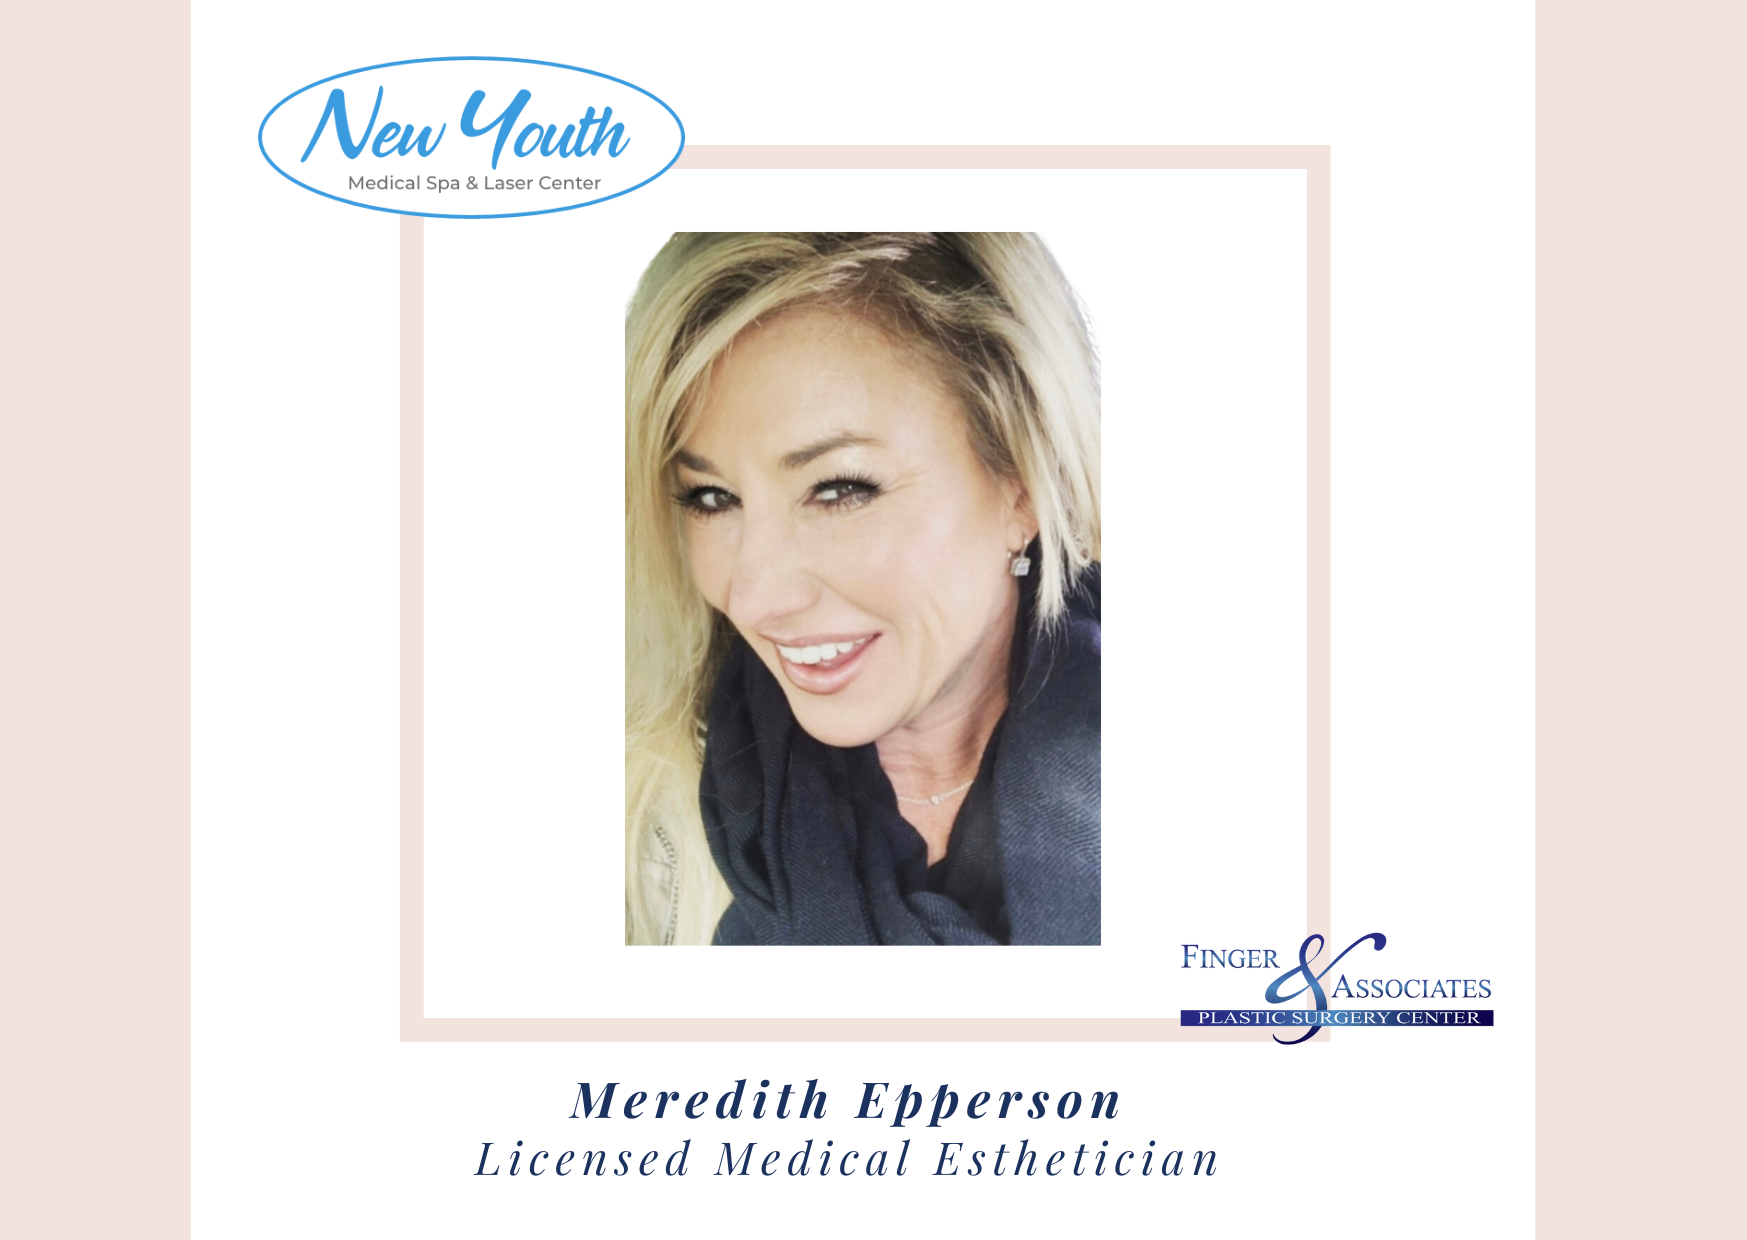 Meredith Epperson Licensed Medical Esthetician